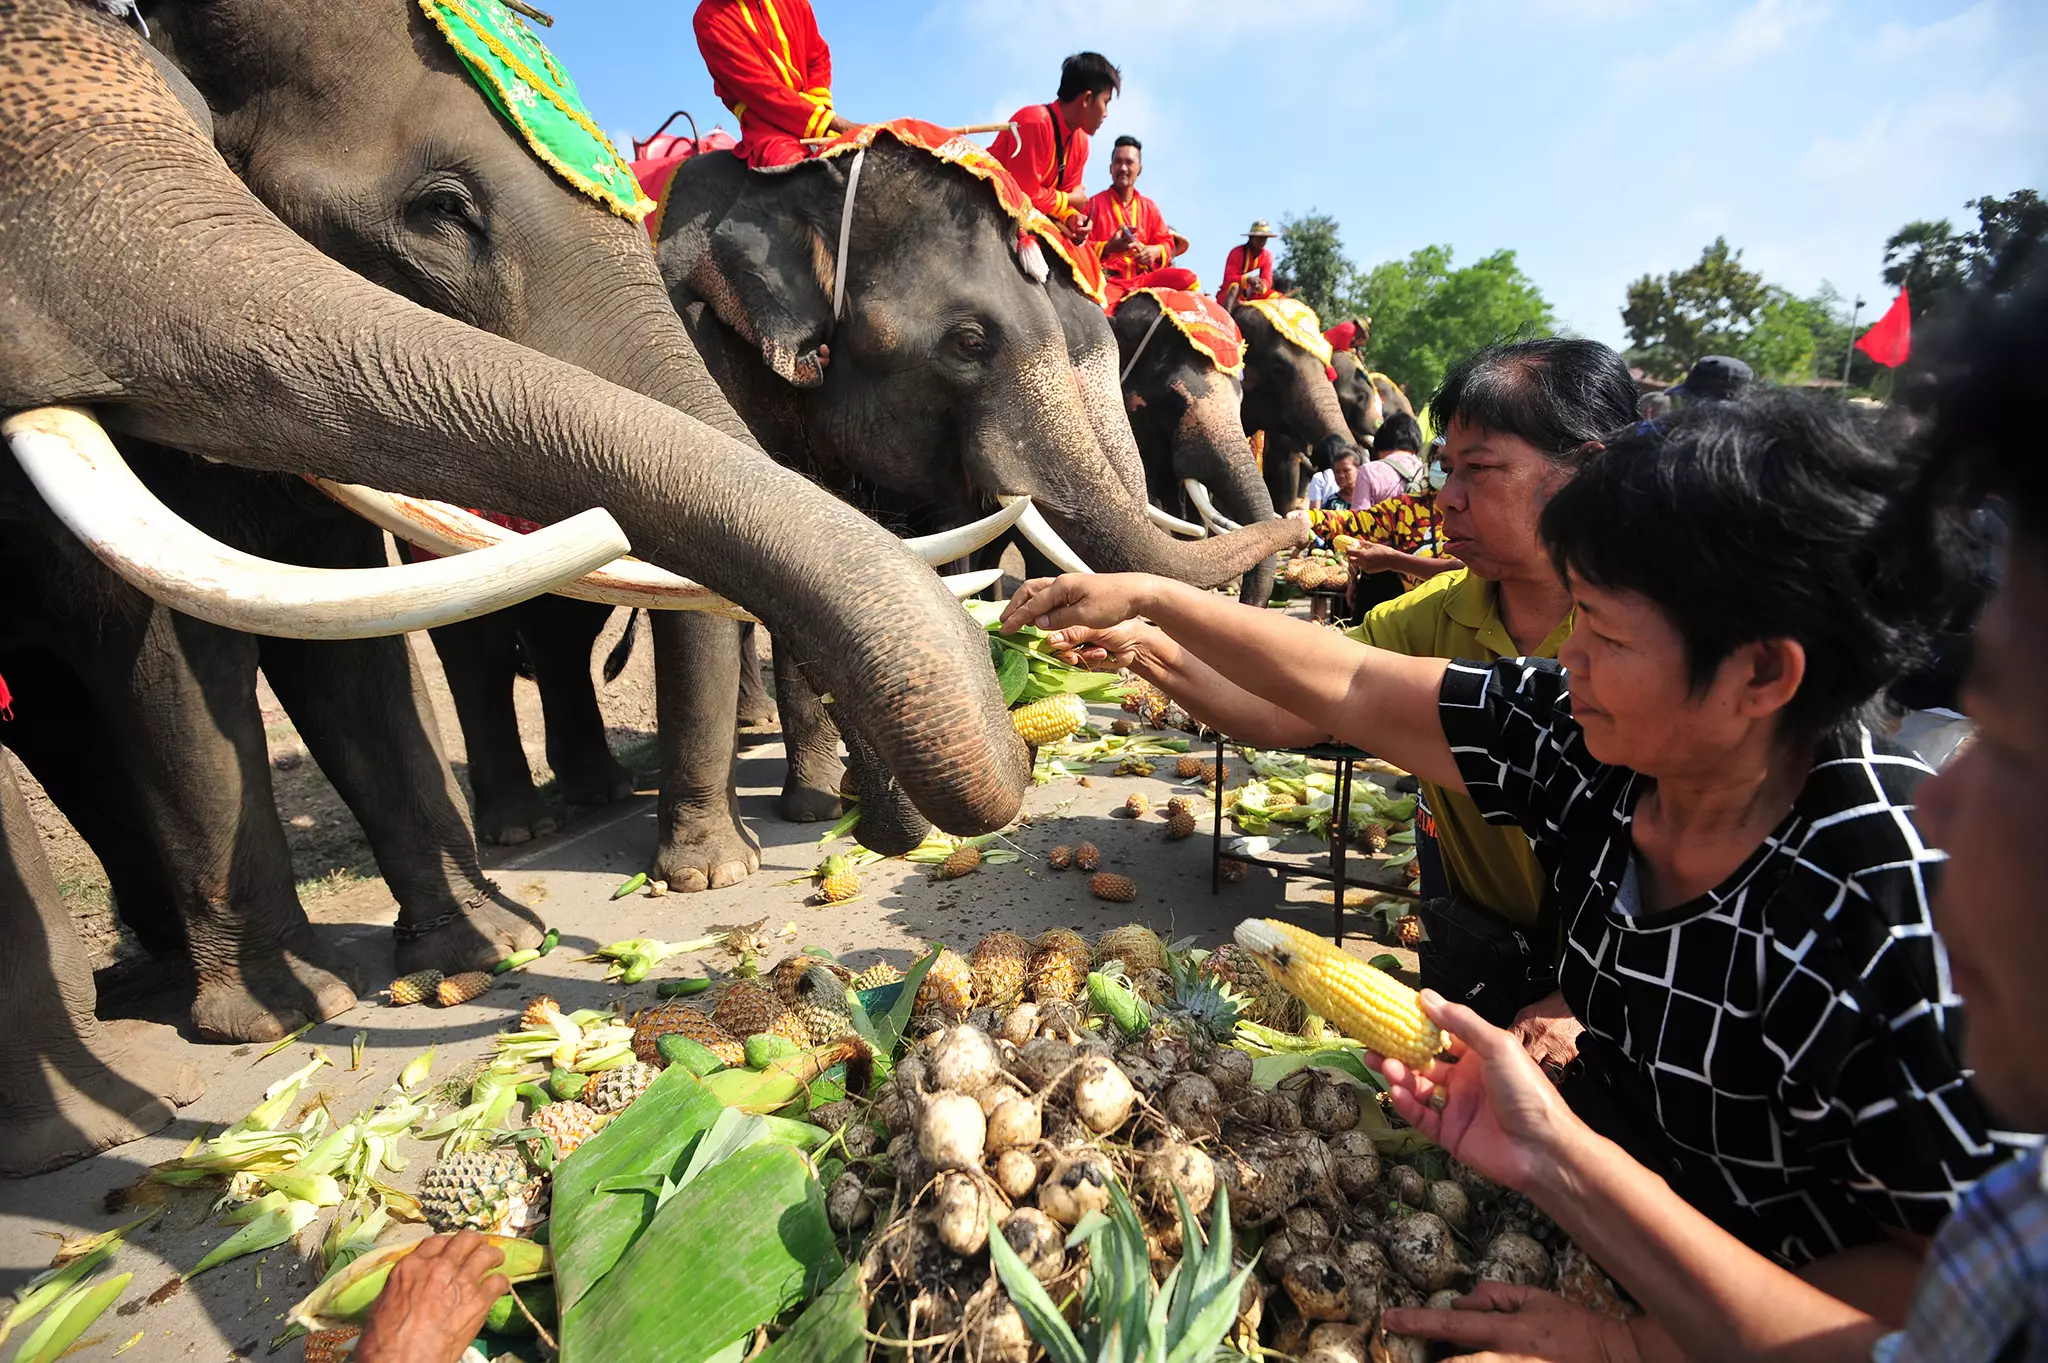 People feed elephants in Thailand on National Elephant Day.